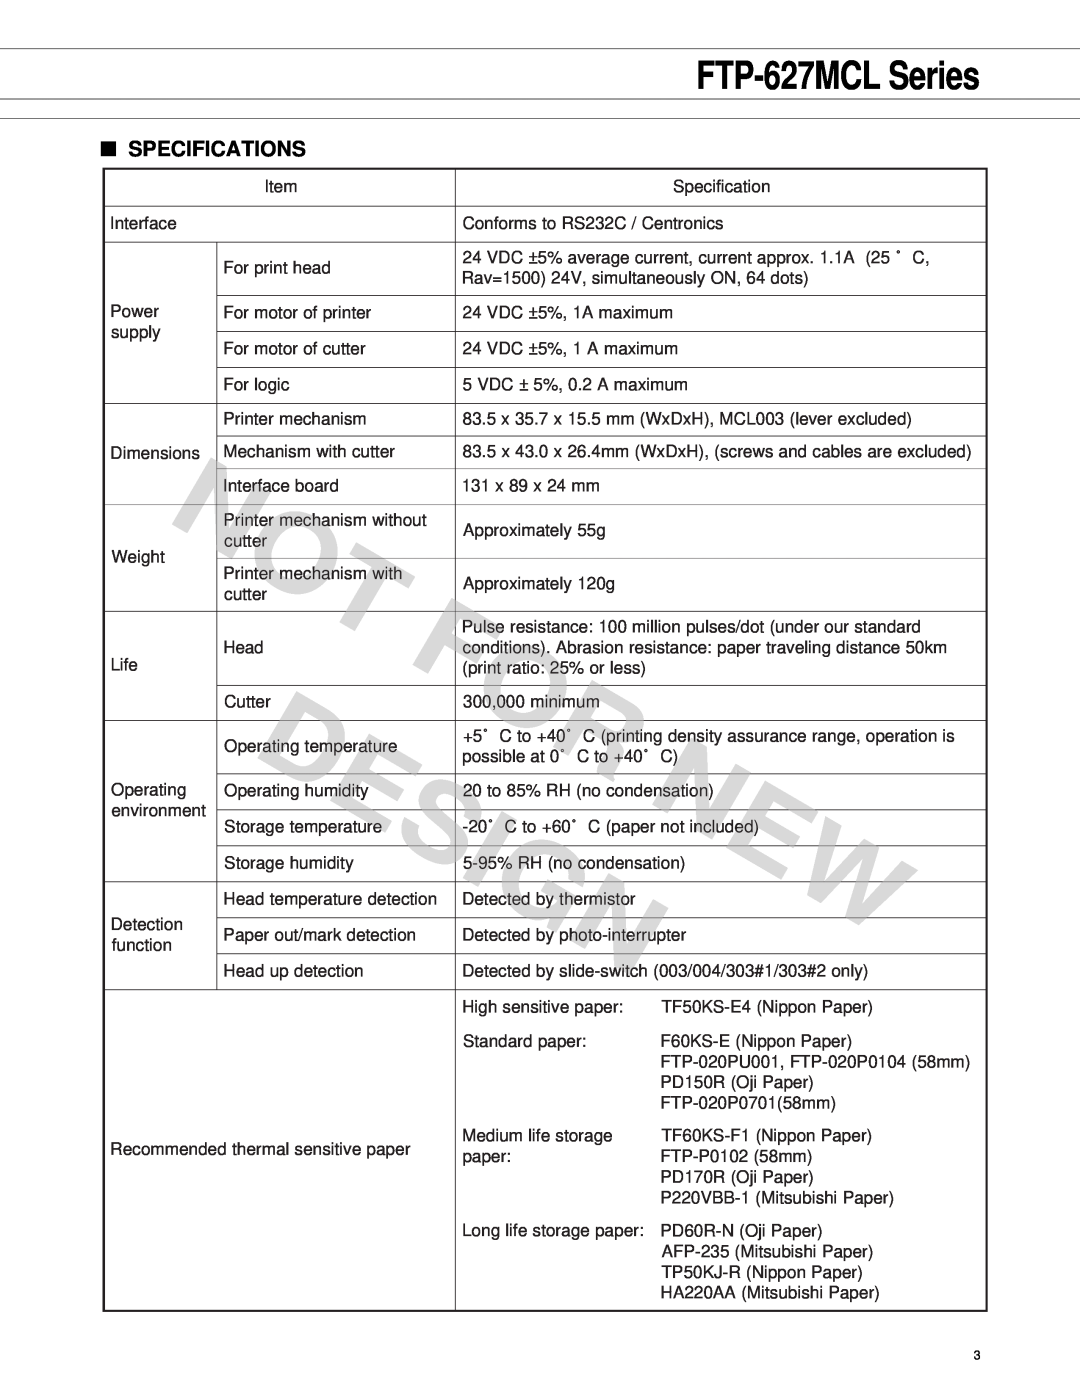 Fujitsu FTP-627 Series manual Design, FTP-627MCL Series, Specifications 